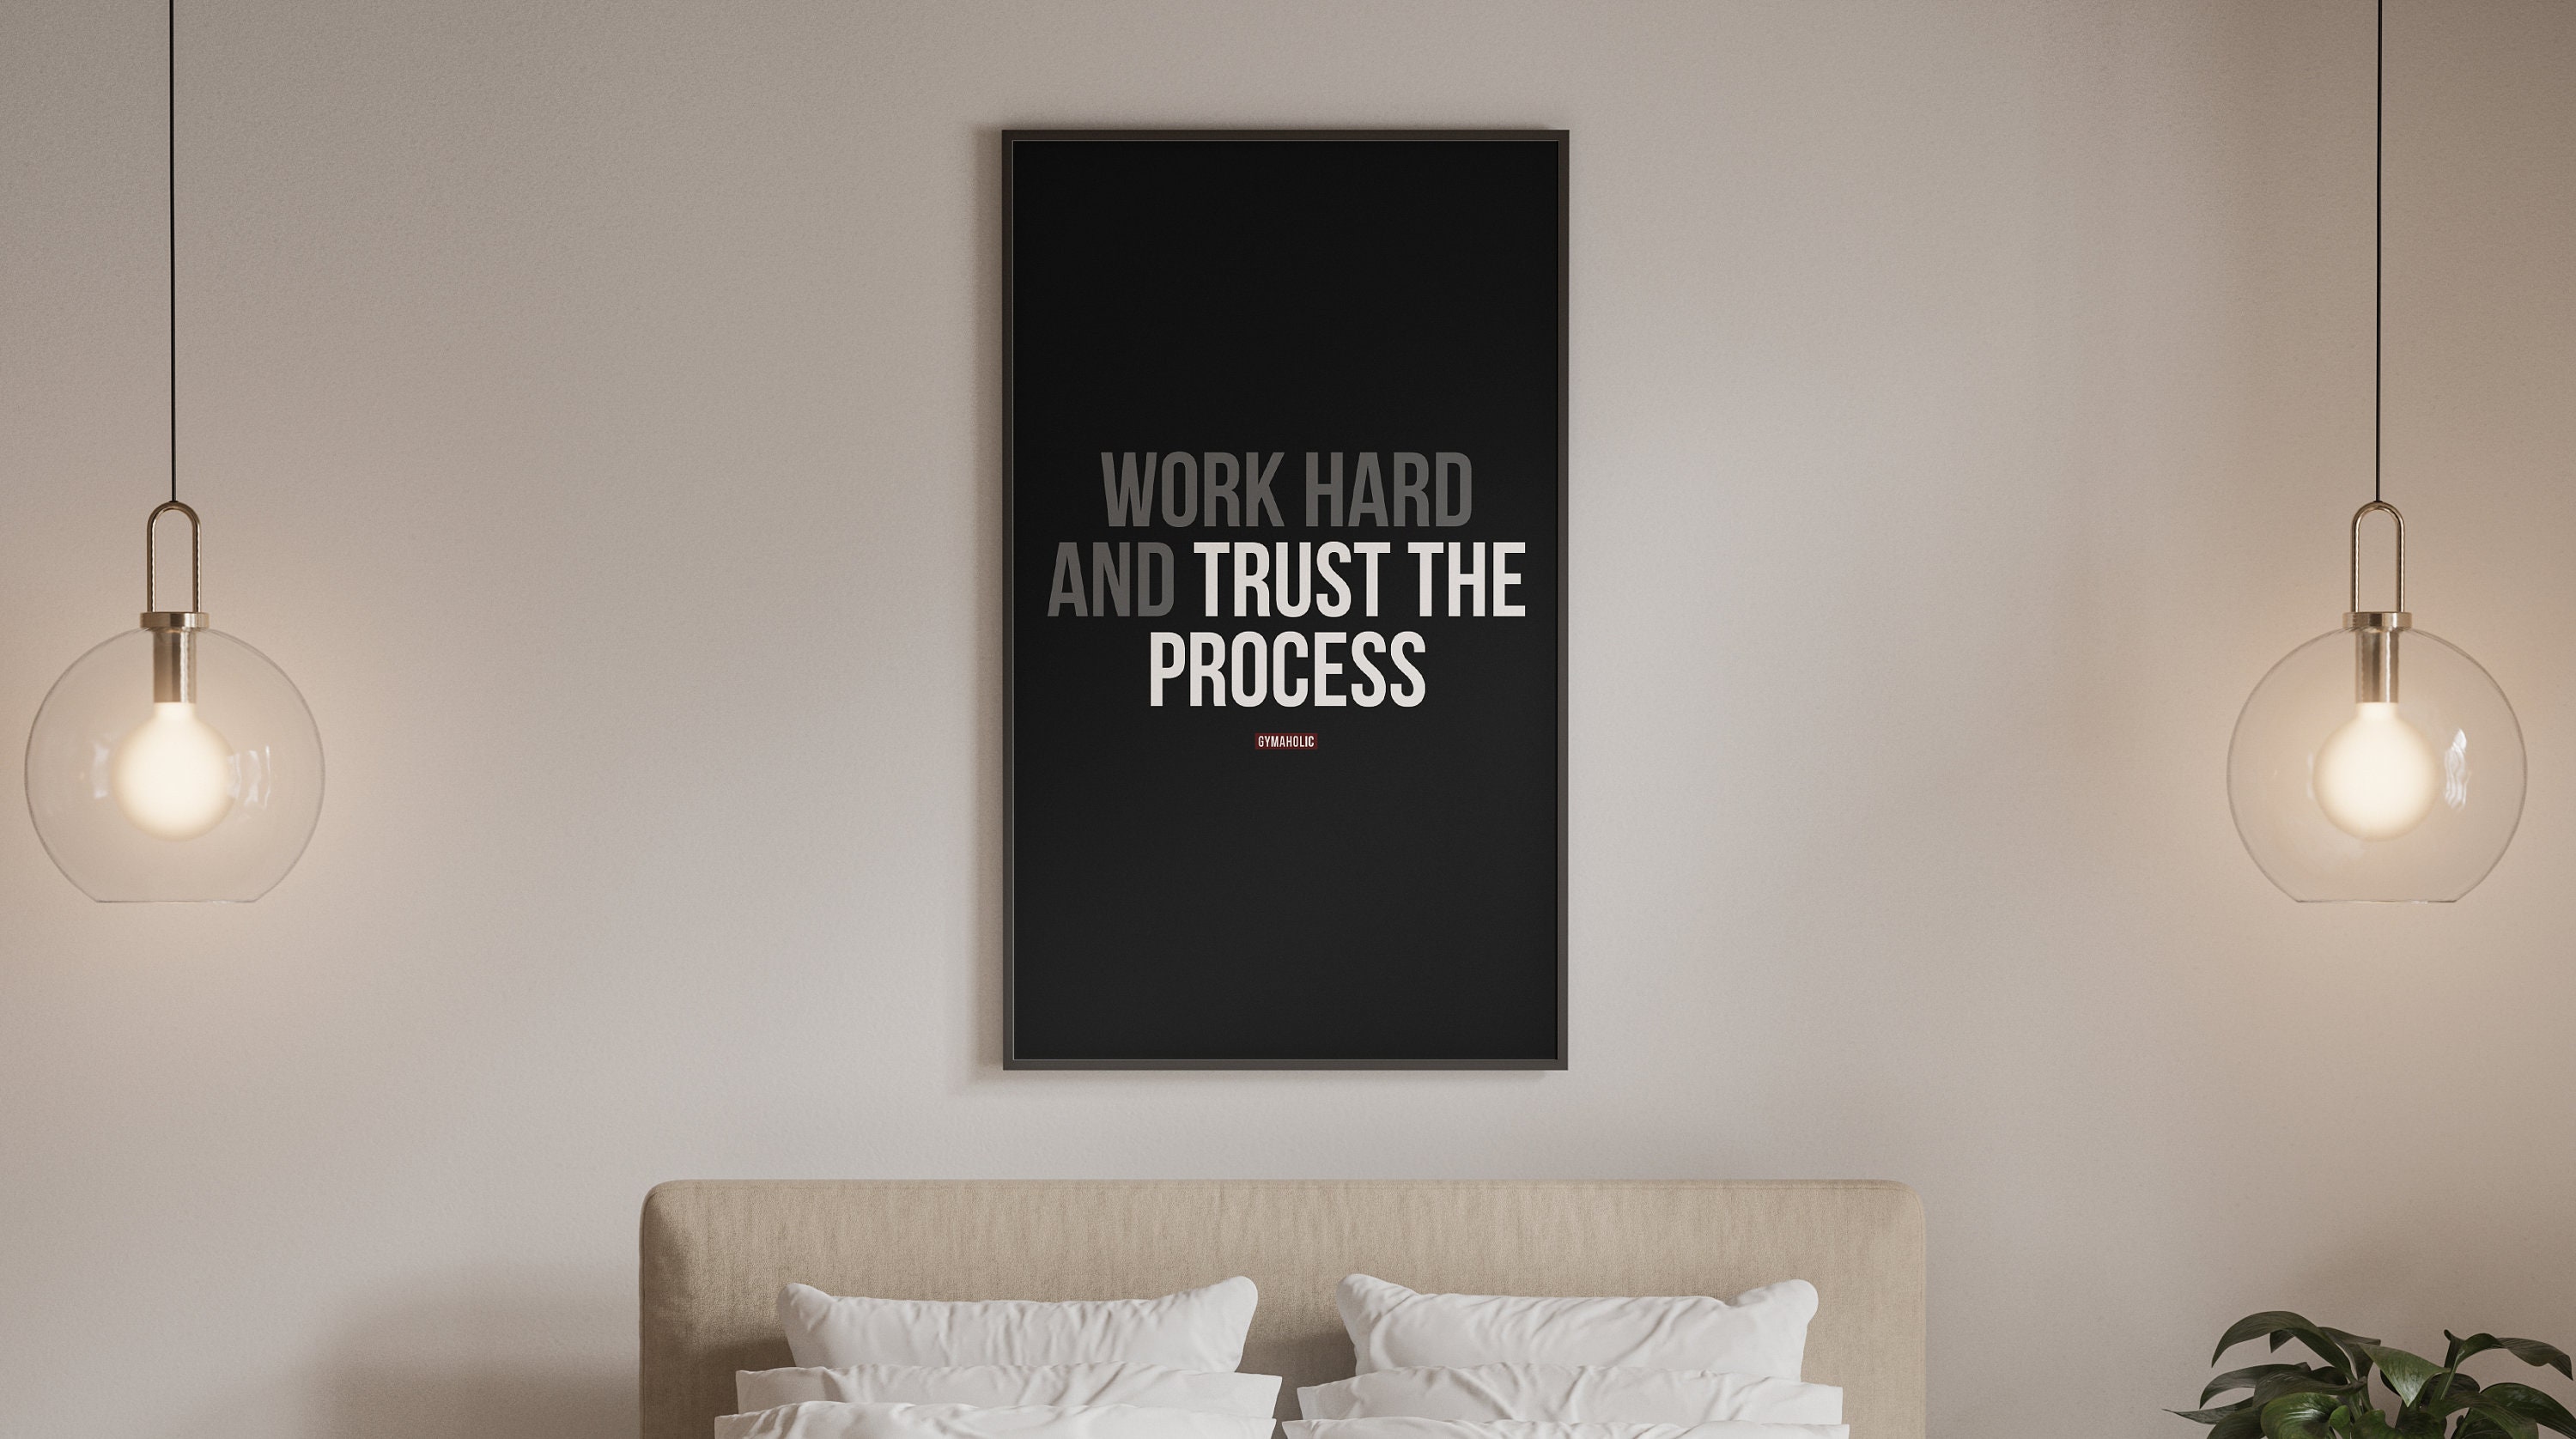 Fitness Quotes-trust the Process Workout Power Art Vinyl 